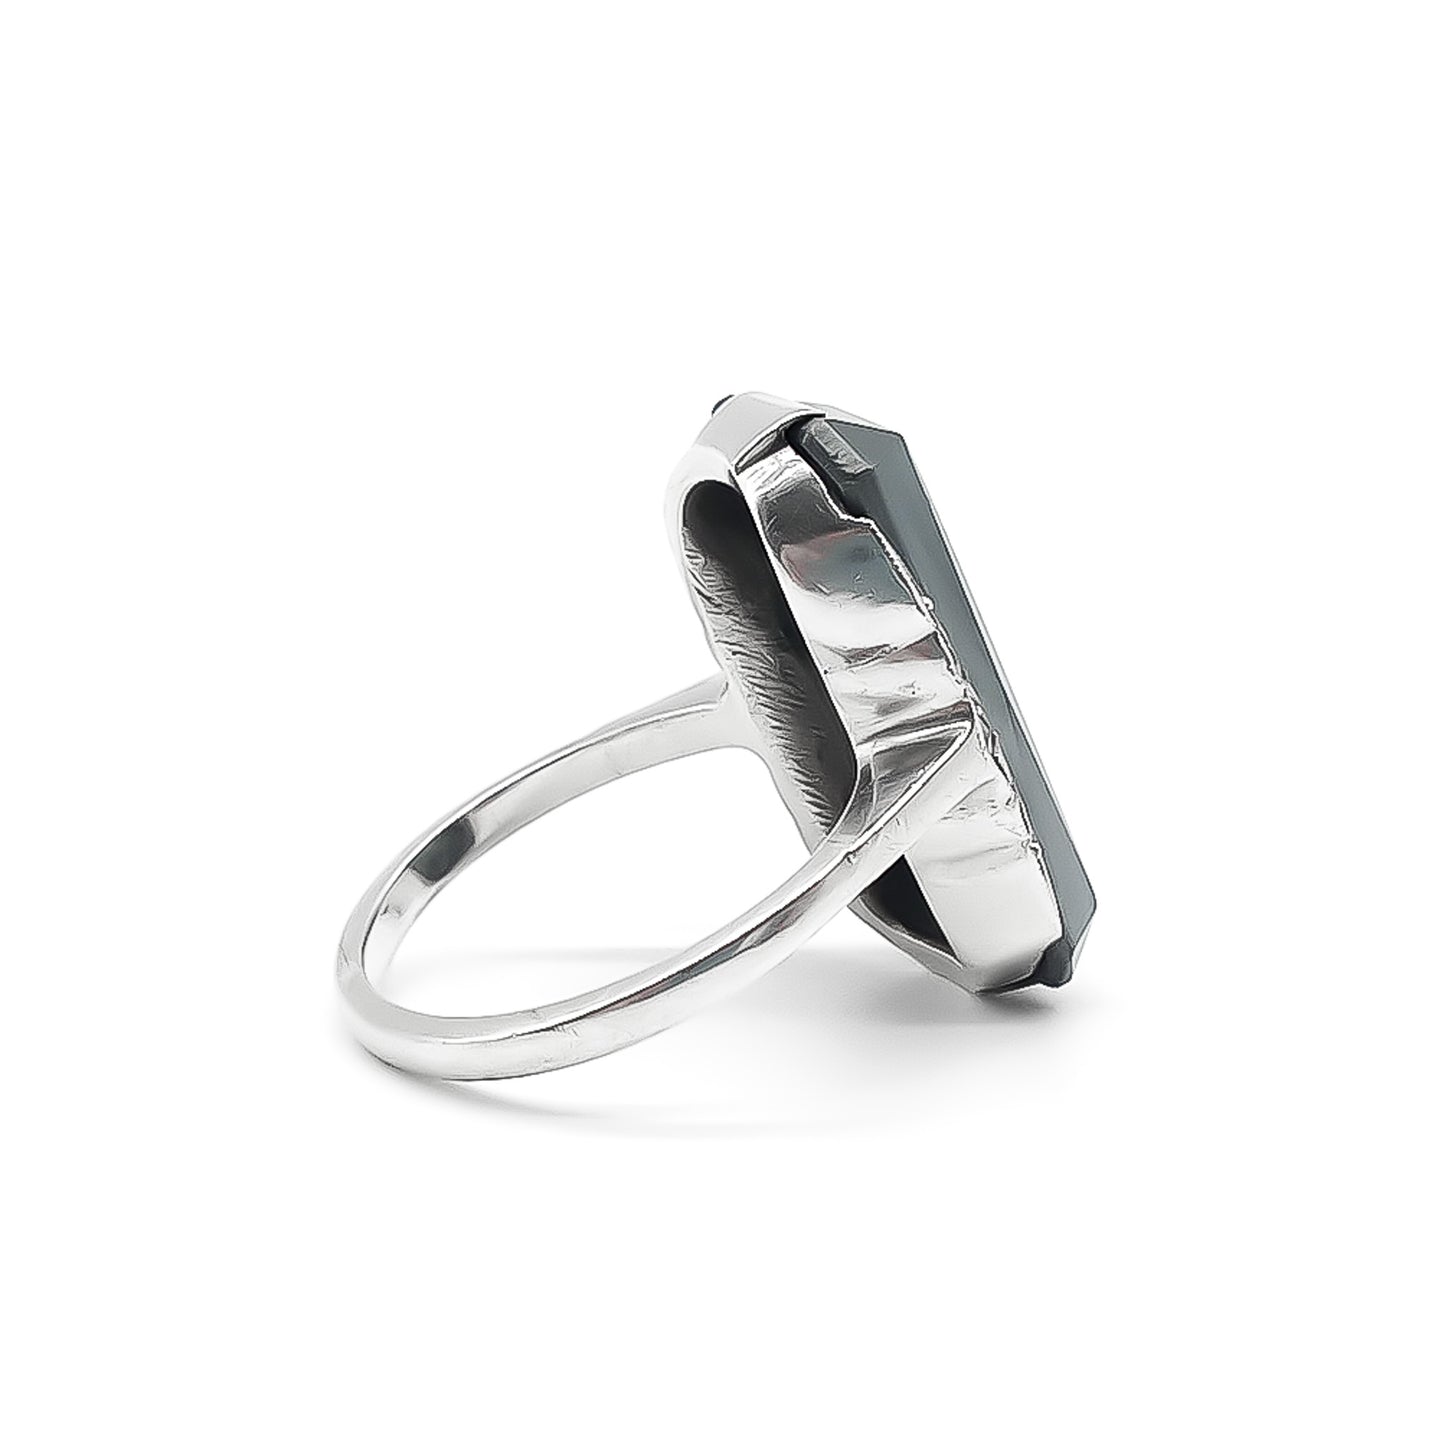 Lovely Art Deco sterling silver ring set with a faceted rectangular hematite and marcasite stones.